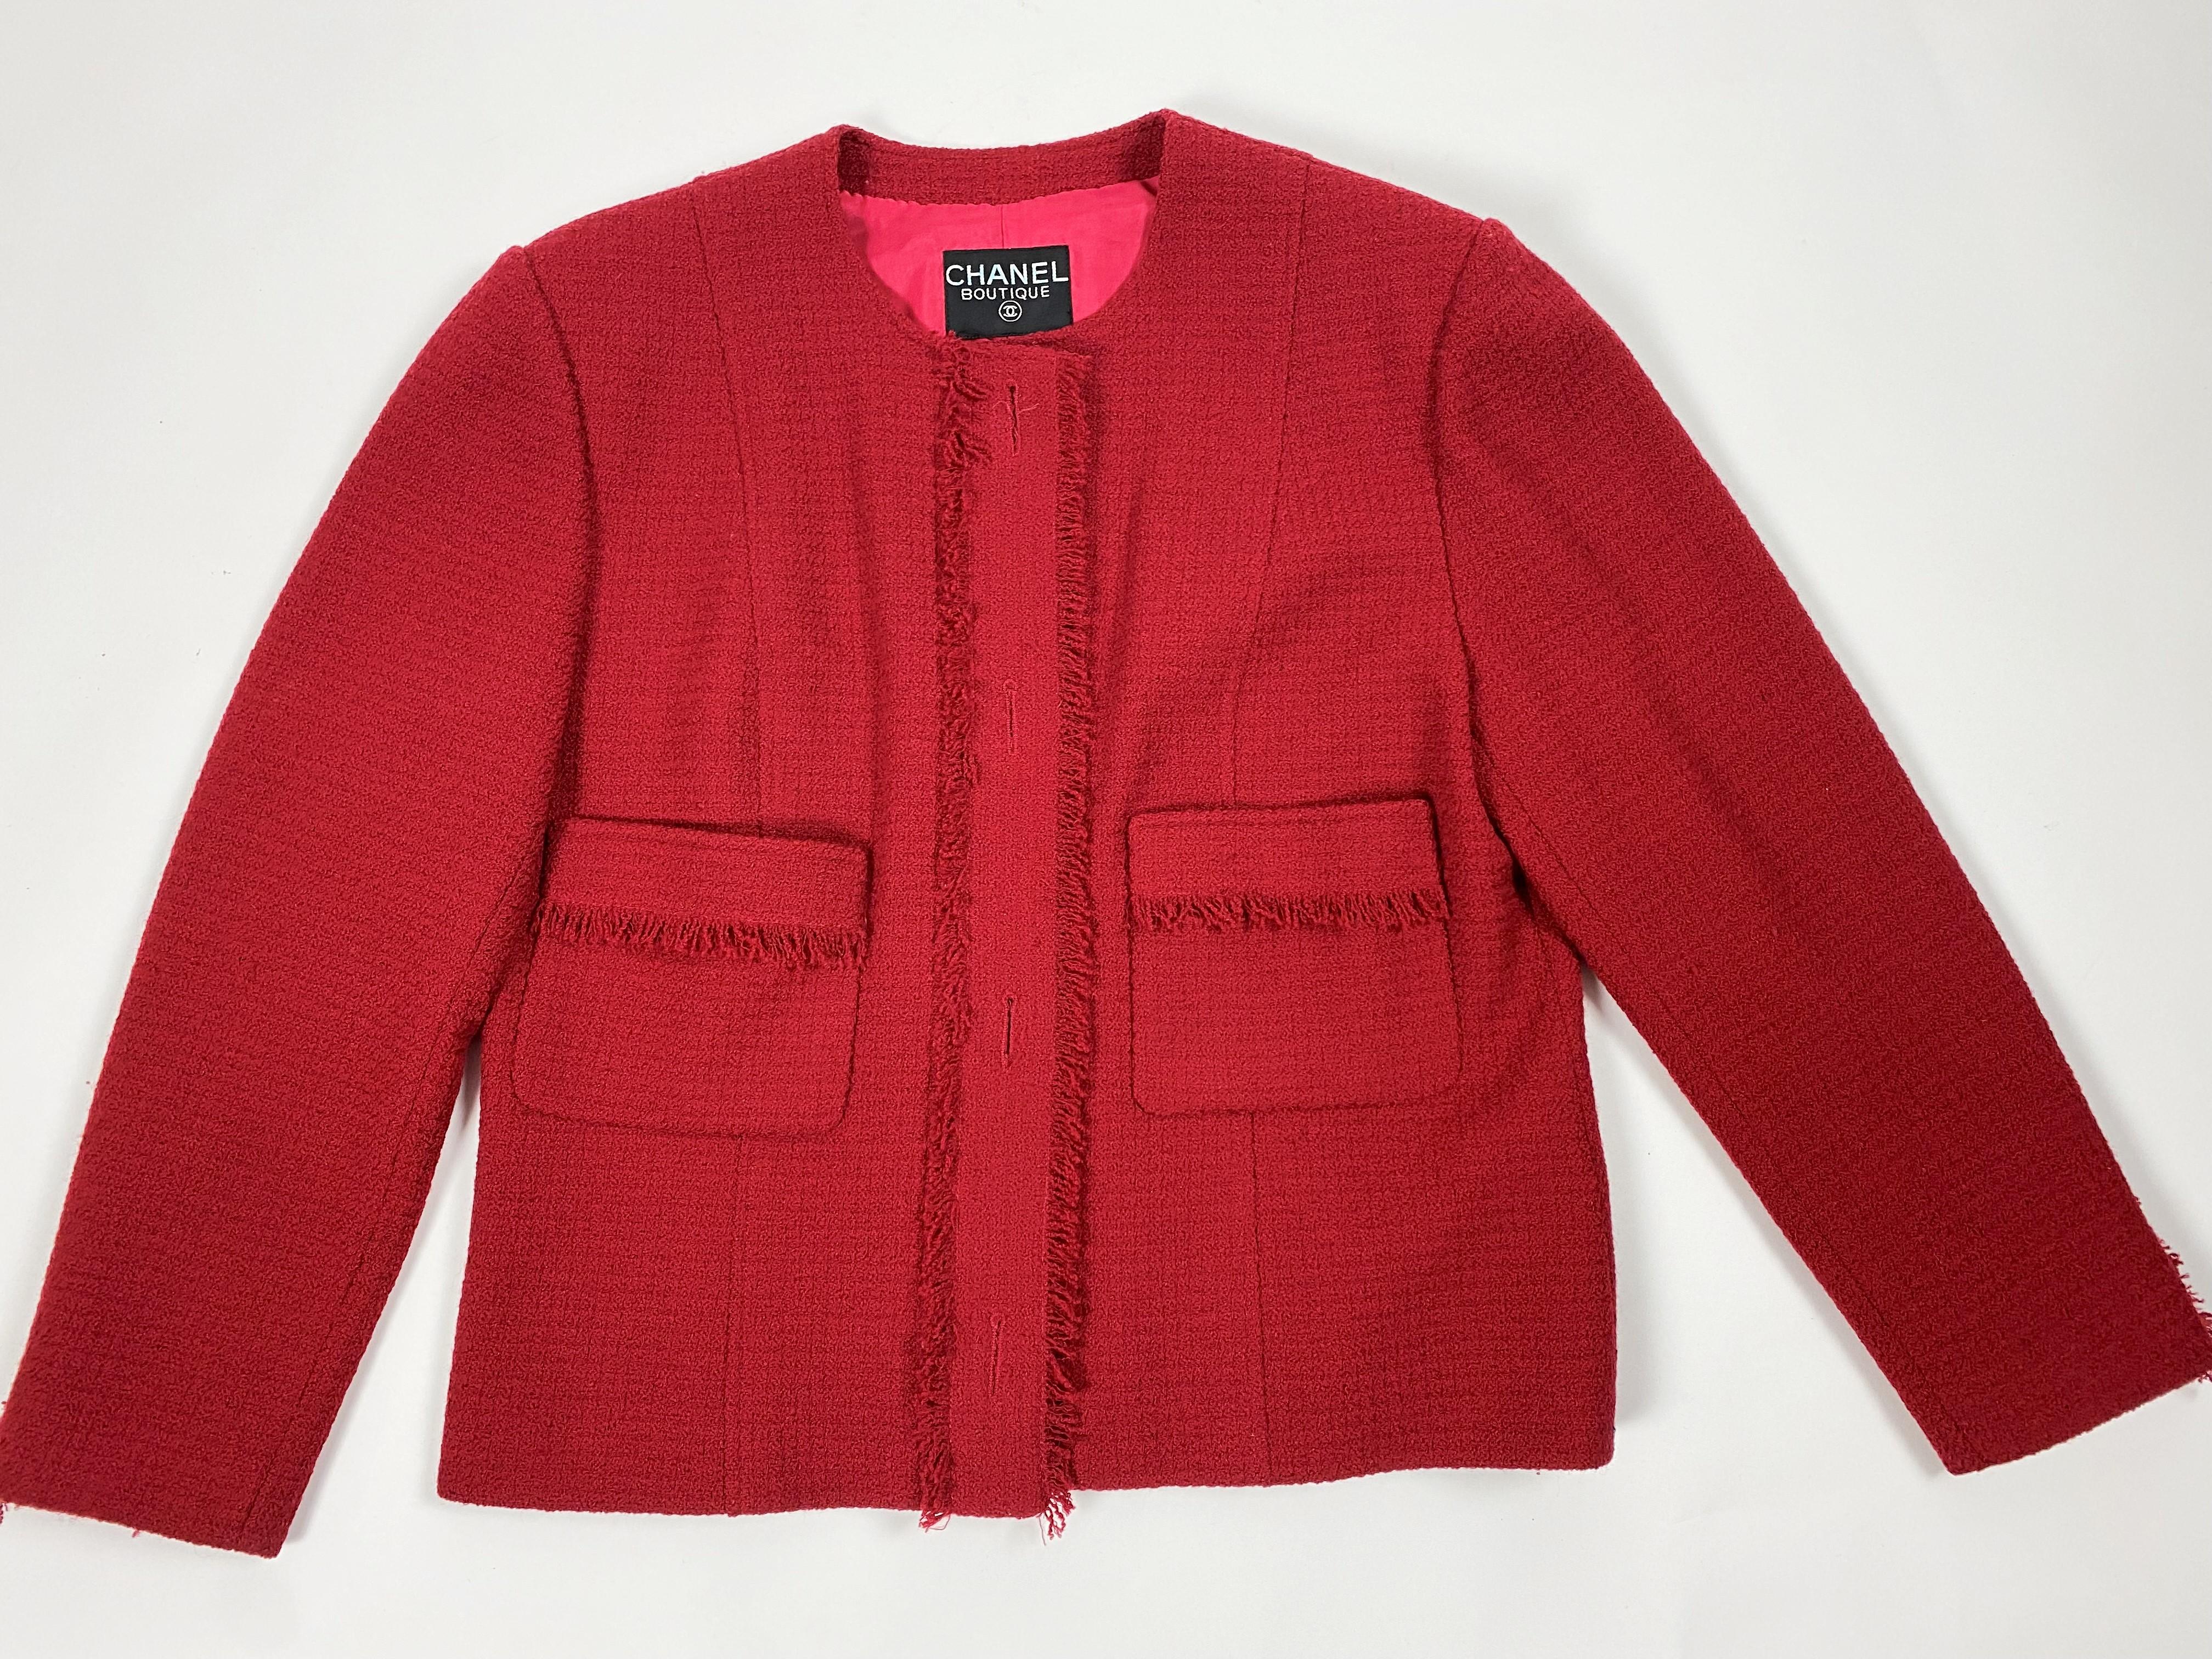 A Chanel - Karl Lagerfeld Red Mohair Wool Jacket Circa 1995-2000 For Sale 6